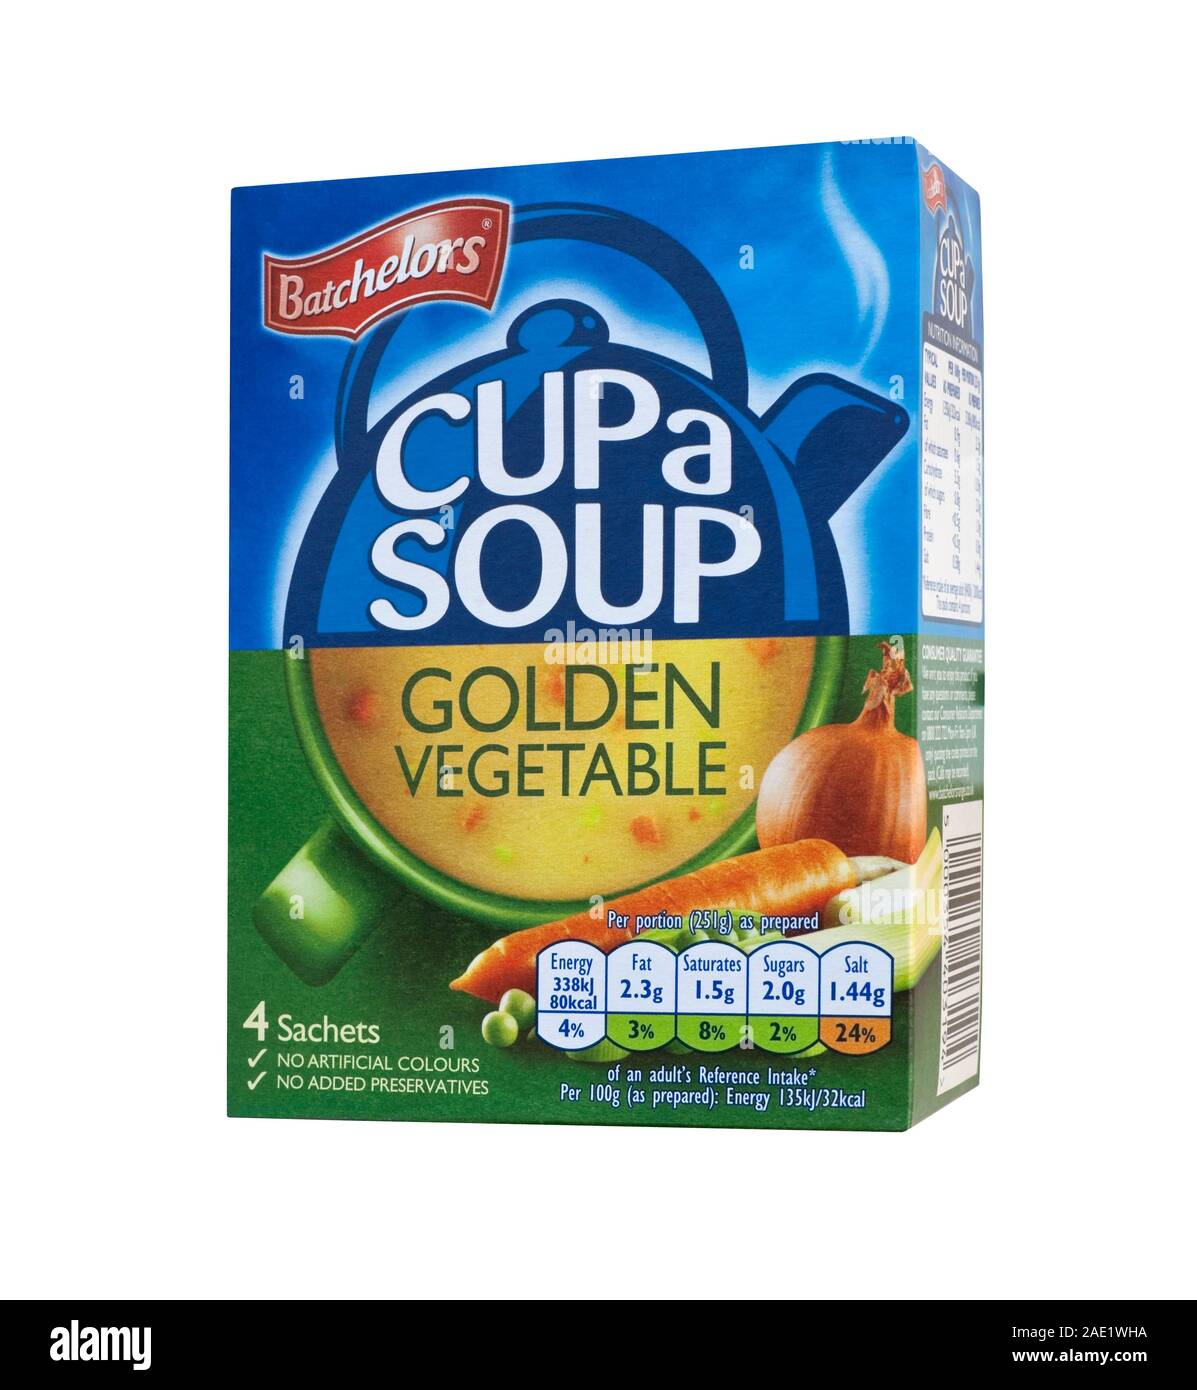 Batchelors golden vegetable cup a soup packet box Stock Photo